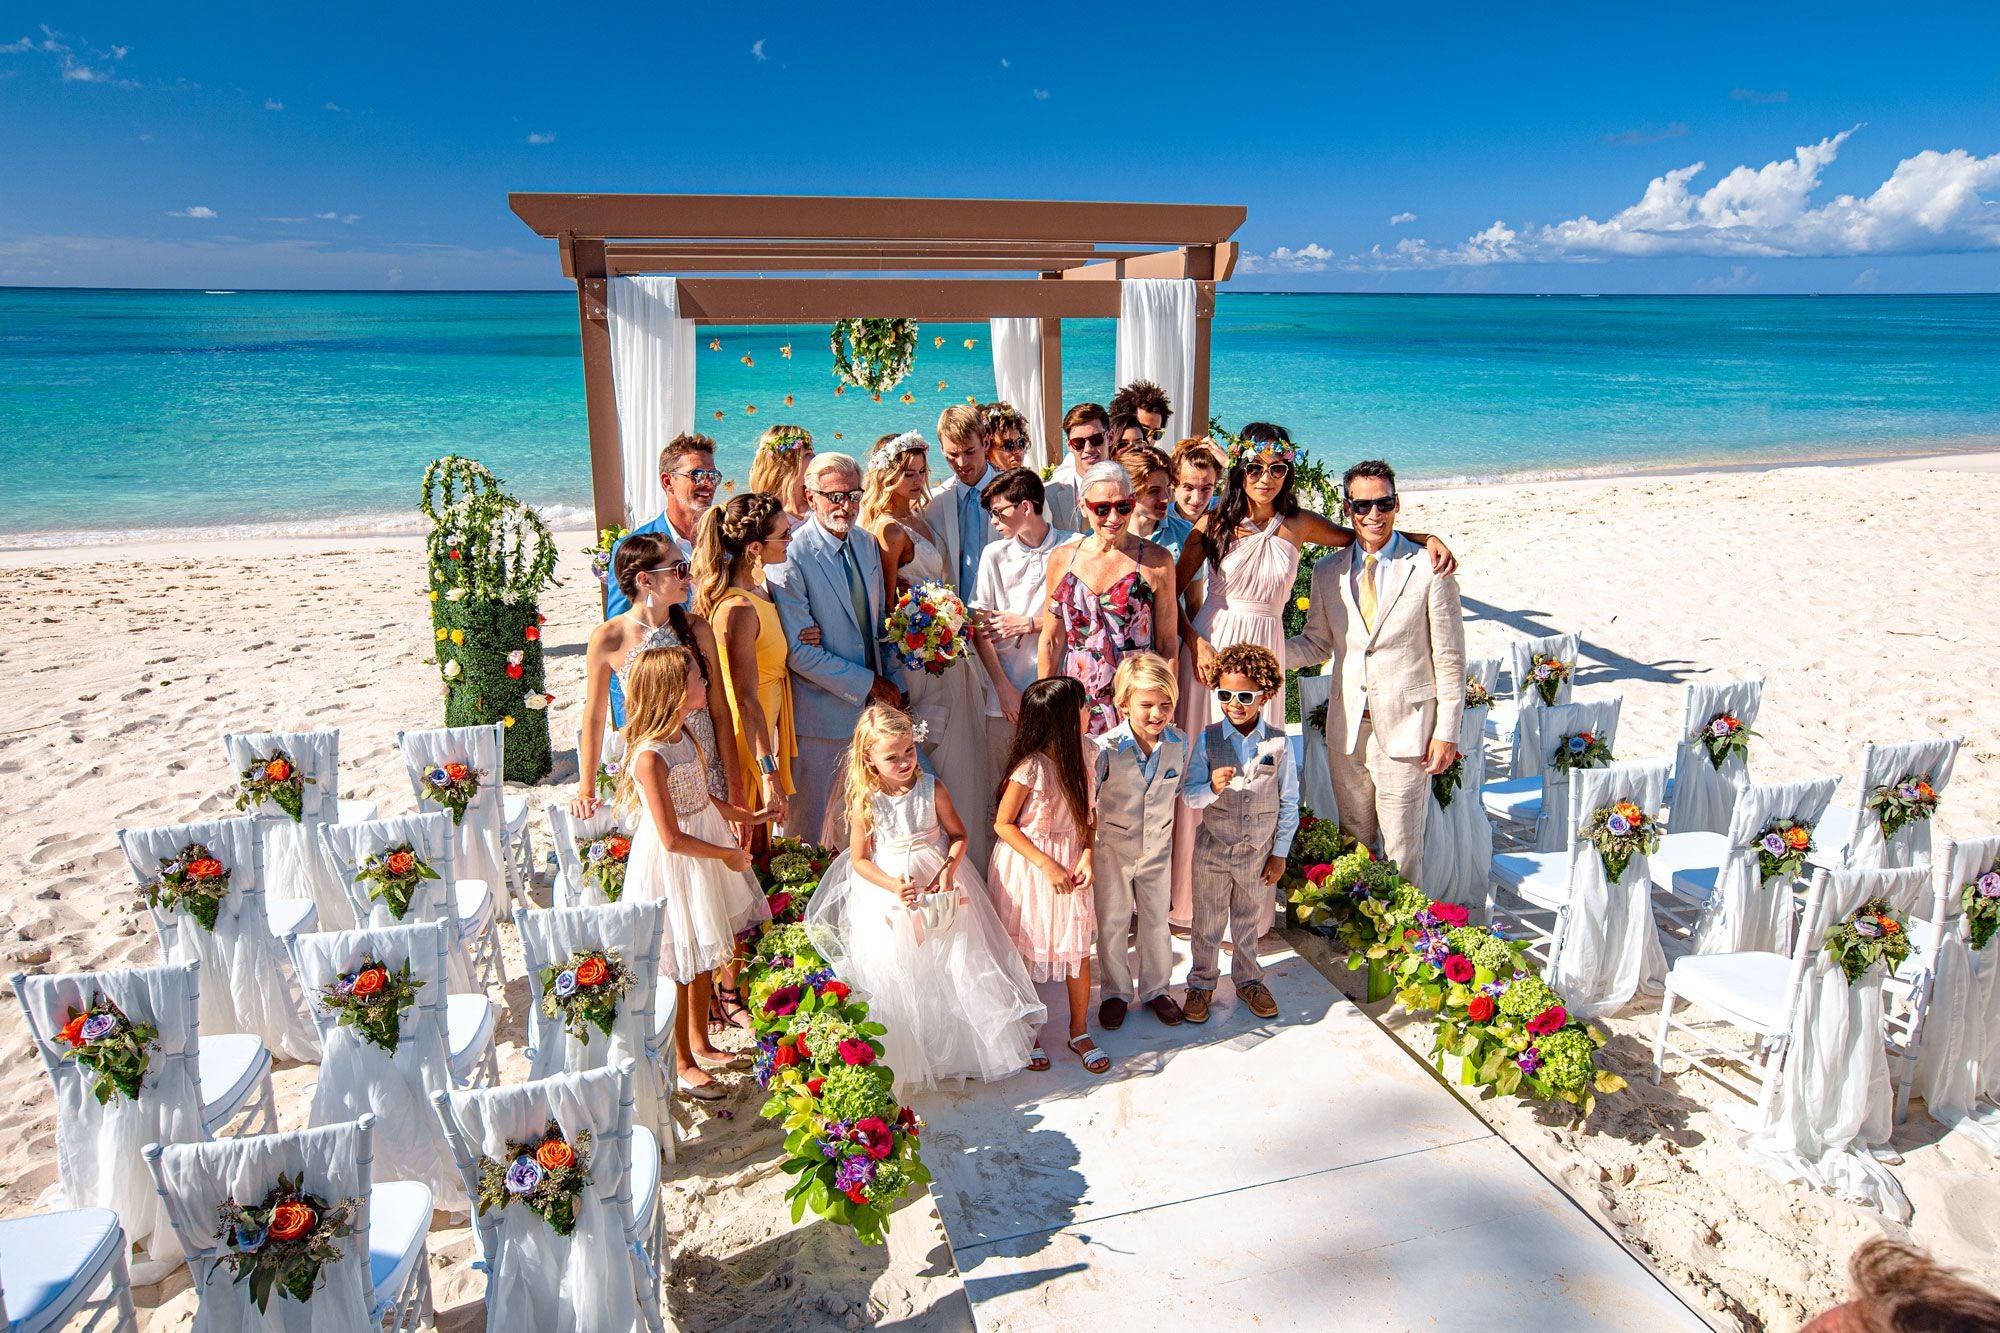 Our Guide to Planning a Destination Wedding